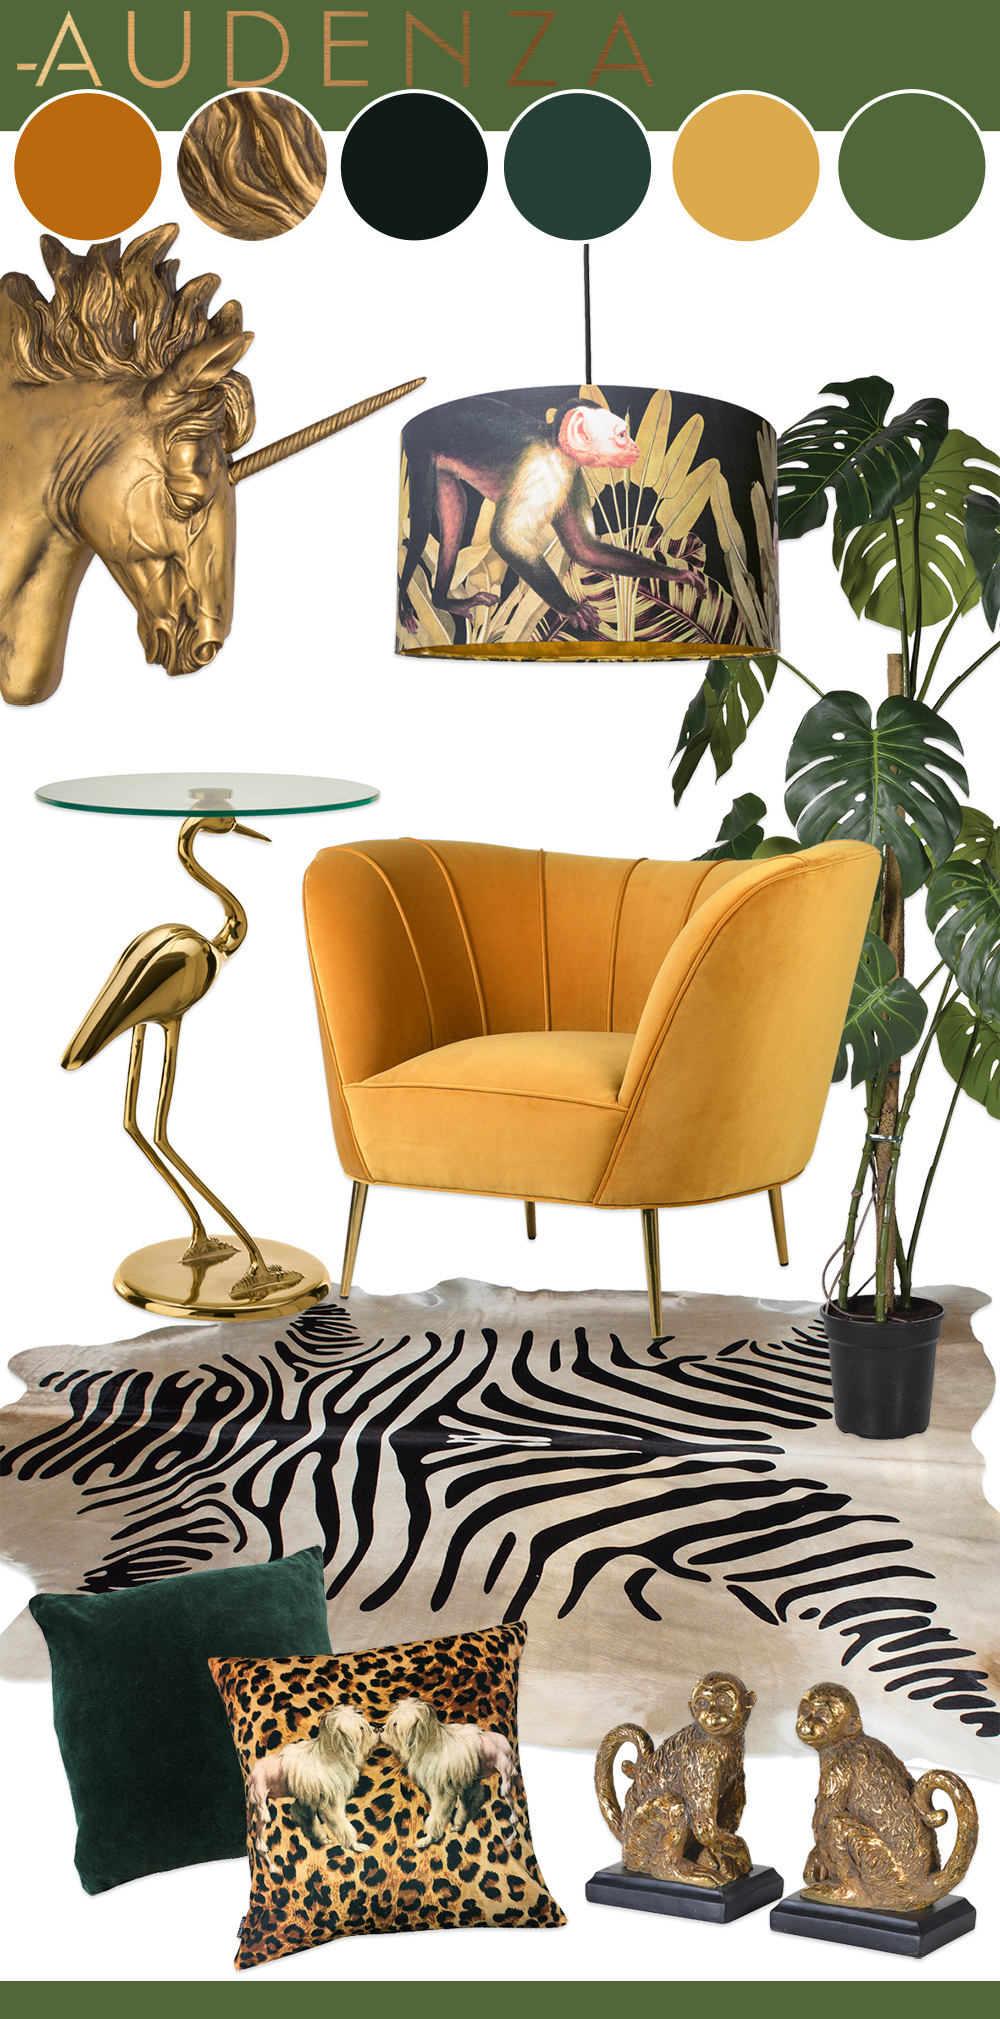 green and mustard yellow interior with animal print